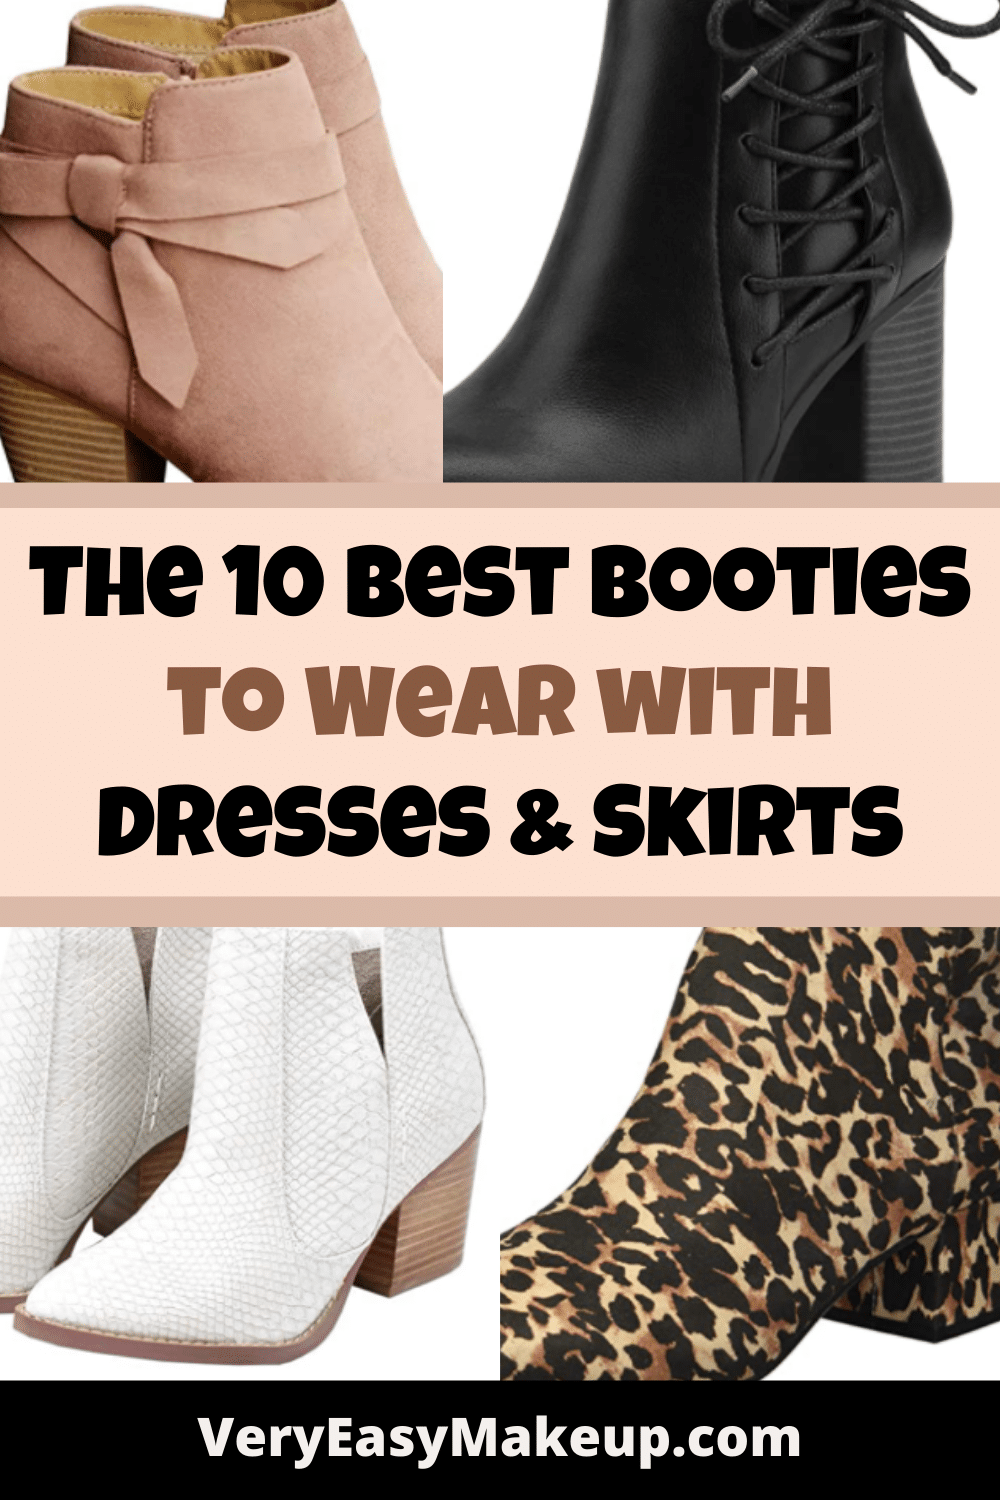 The best booties to wear with dresses and skirts for fall.